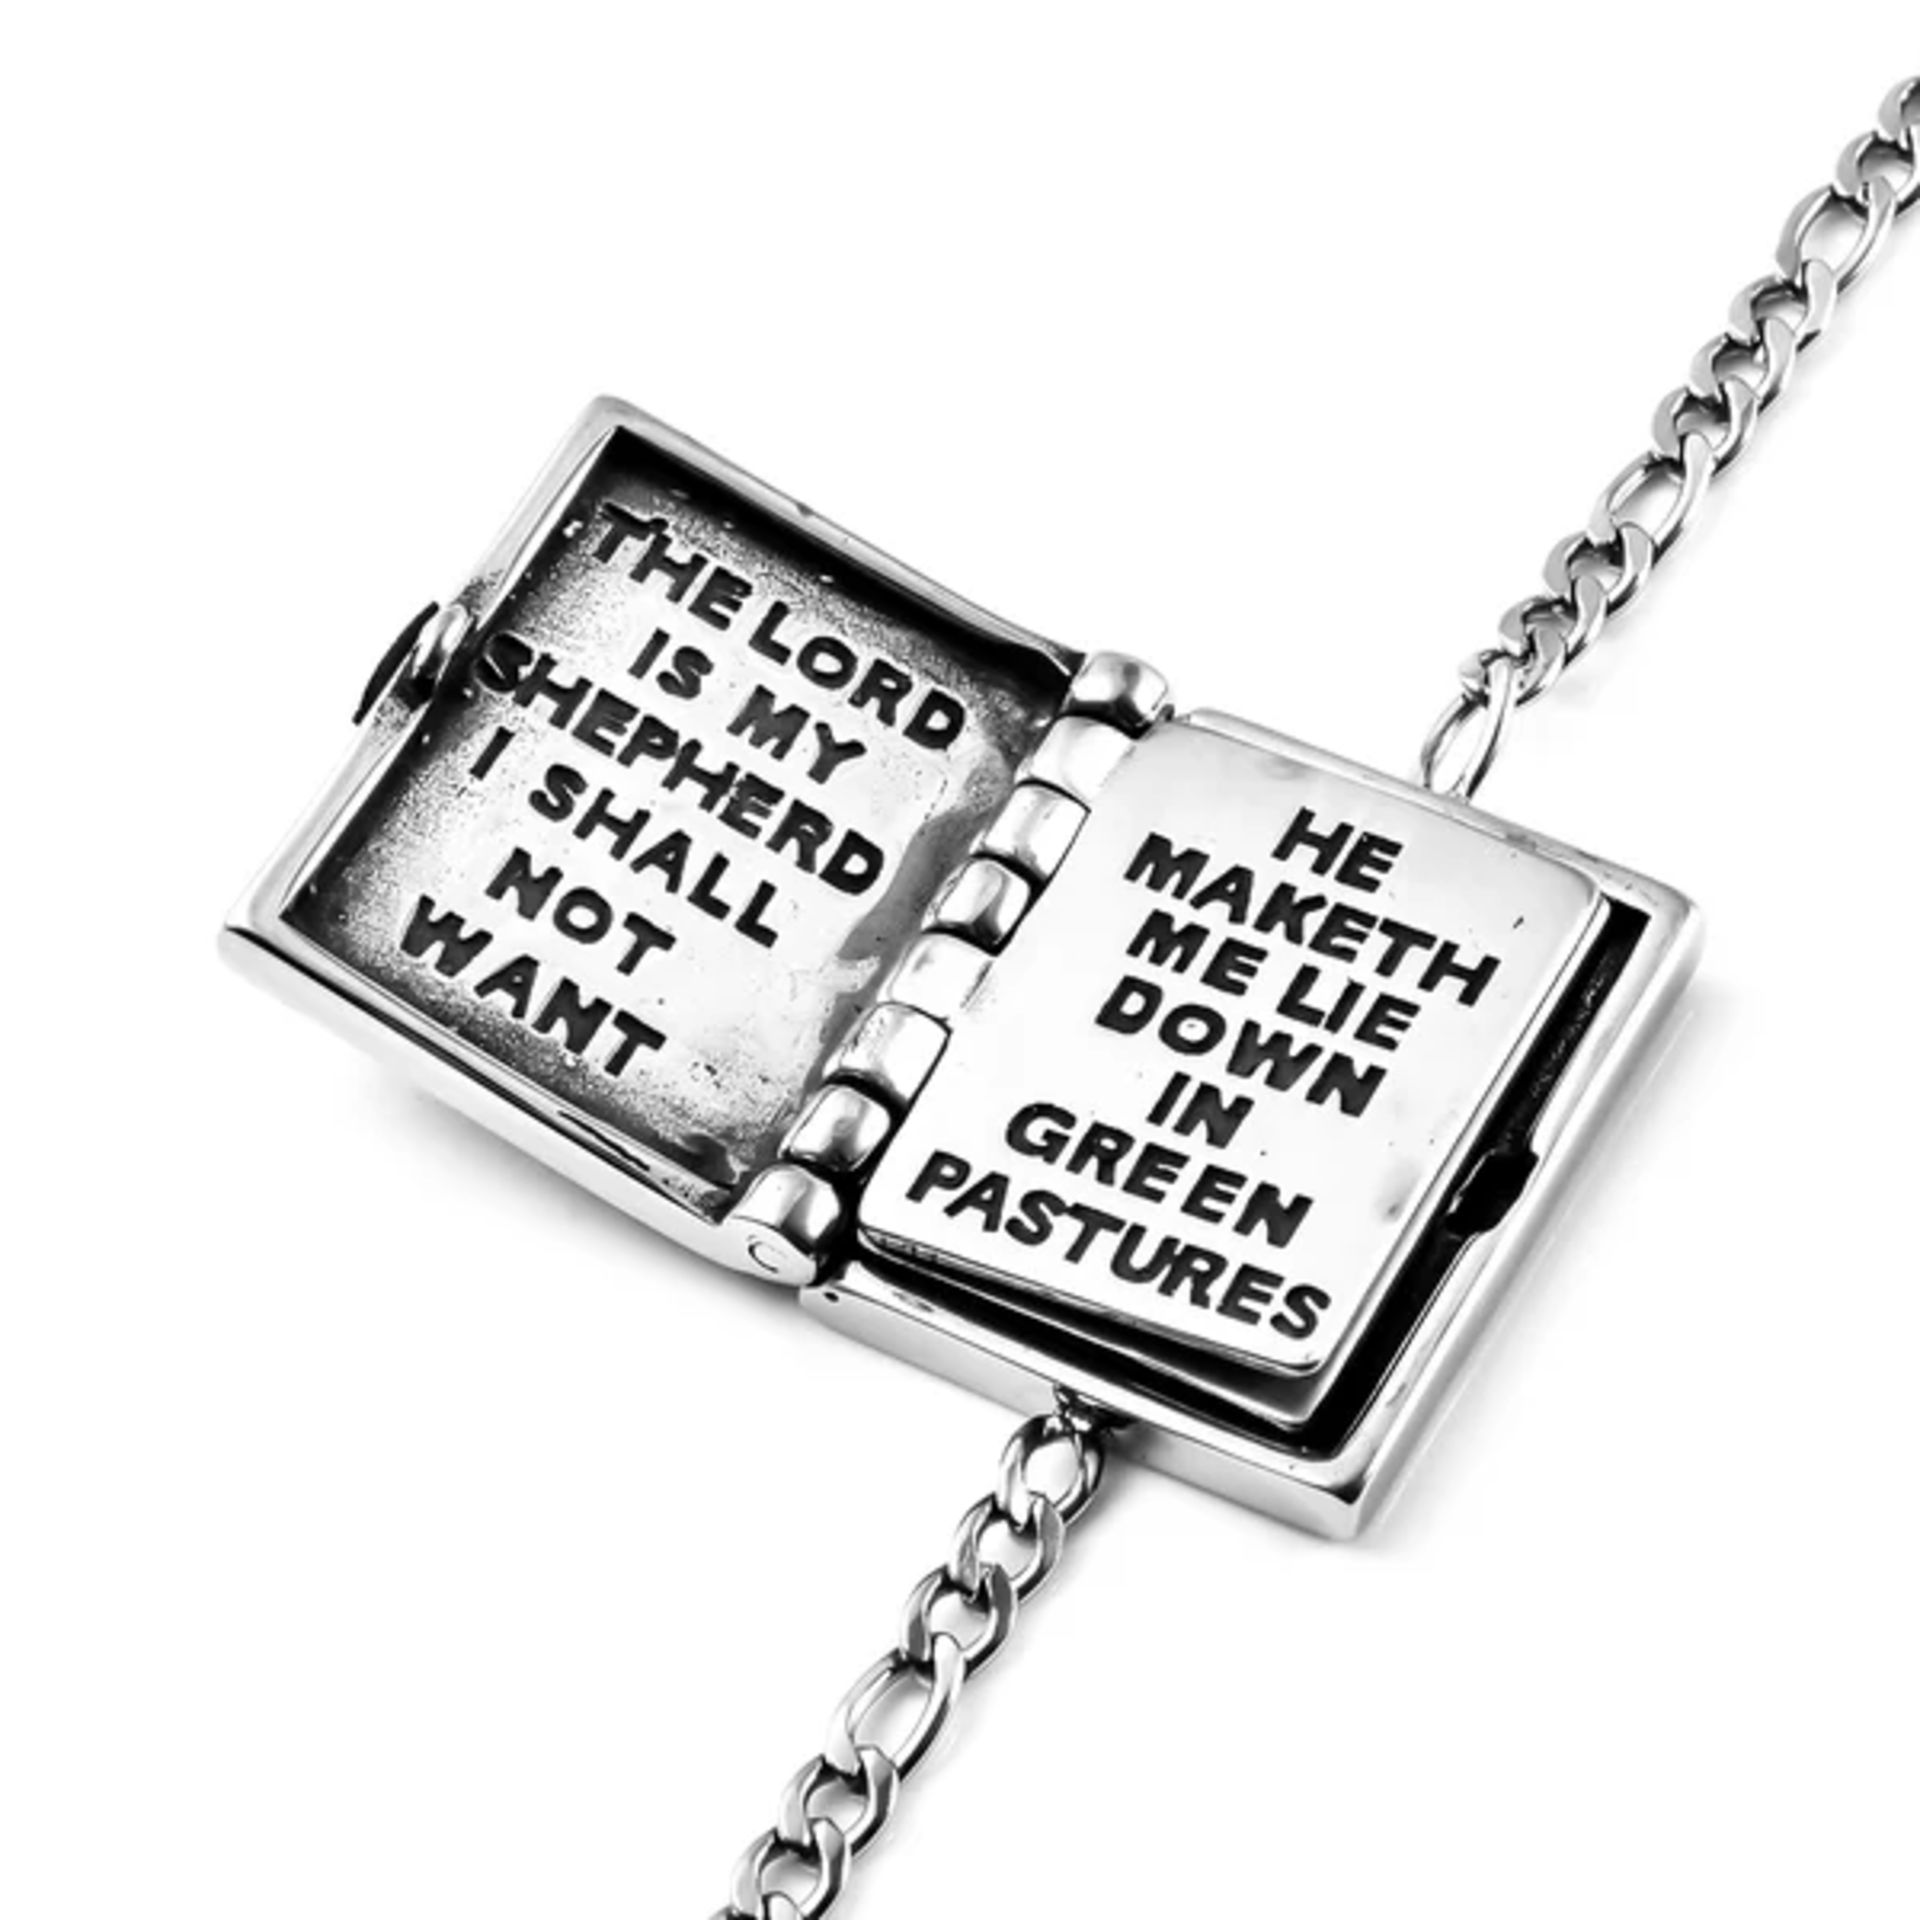 New! Holy Bible Bracelet in Stainless Steel - Image 3 of 6